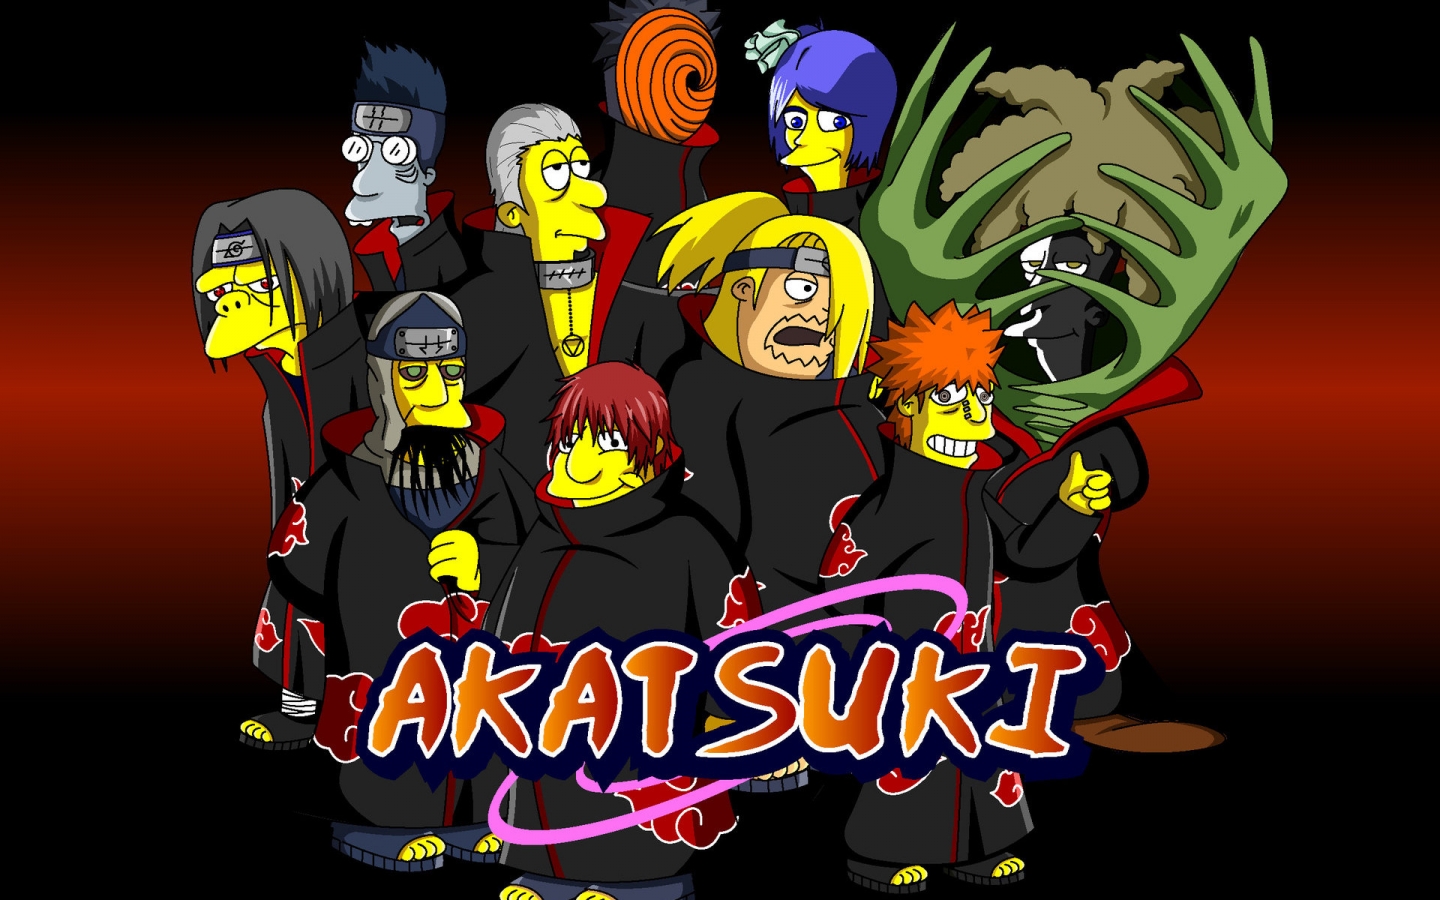 Naruto Simpsons for 1440 x 900 widescreen resolution